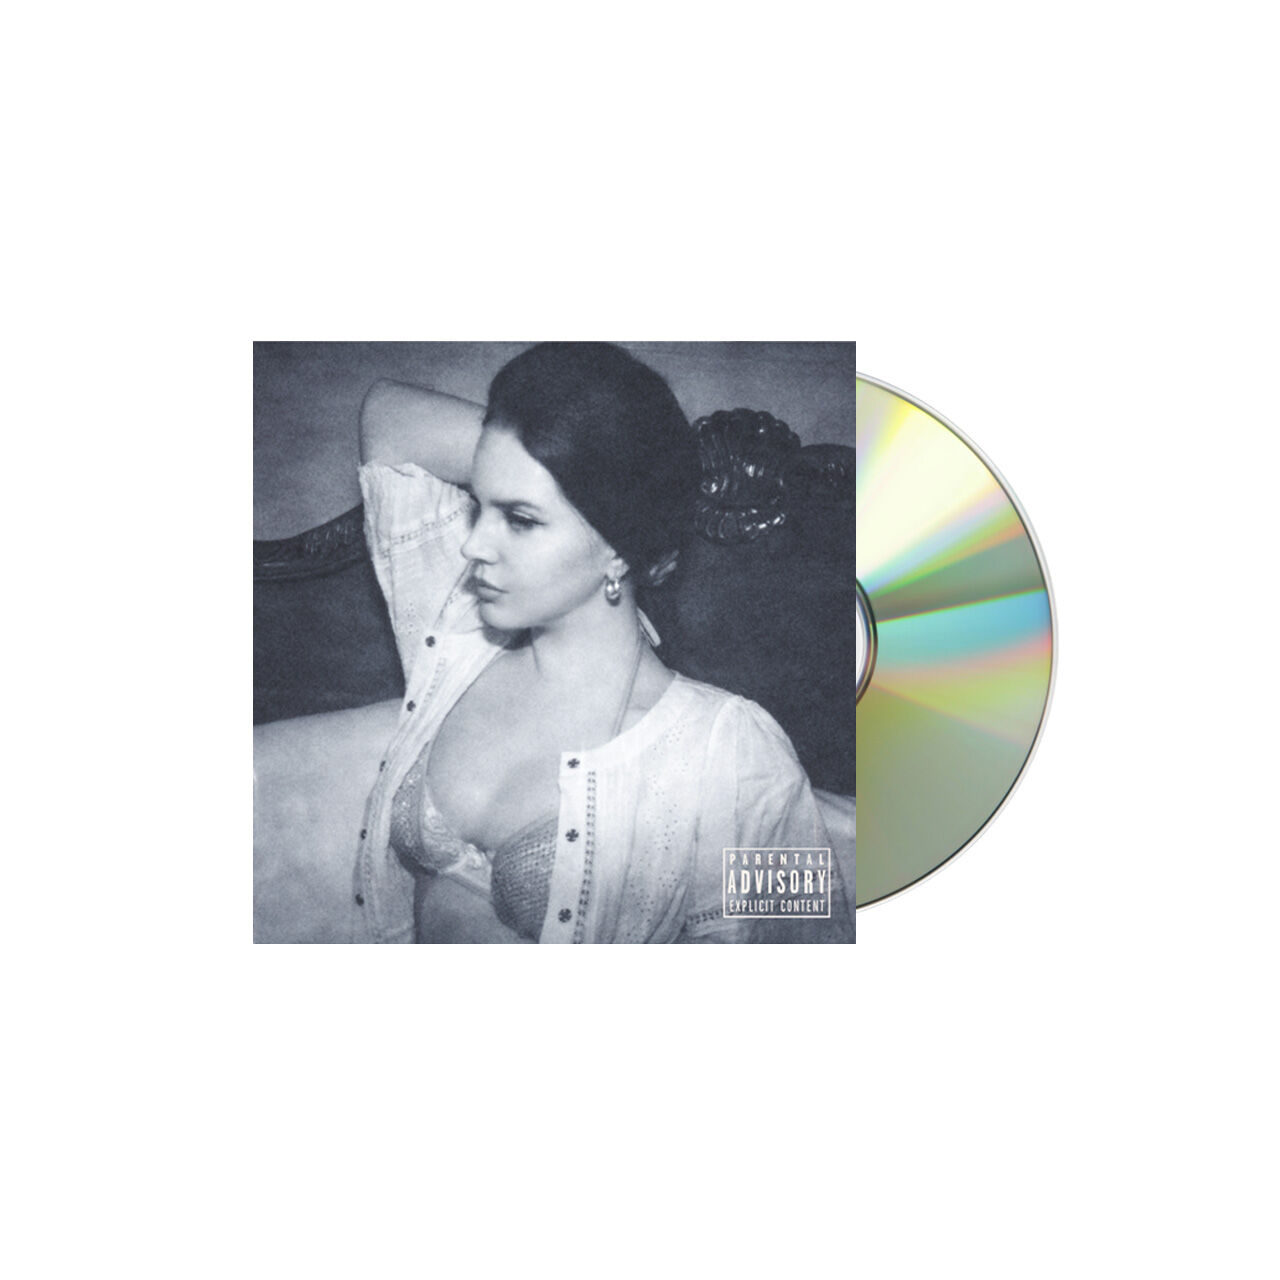 LANA DEL REY Did You Know Alternate Cover Jewel Case CD, Case Dent